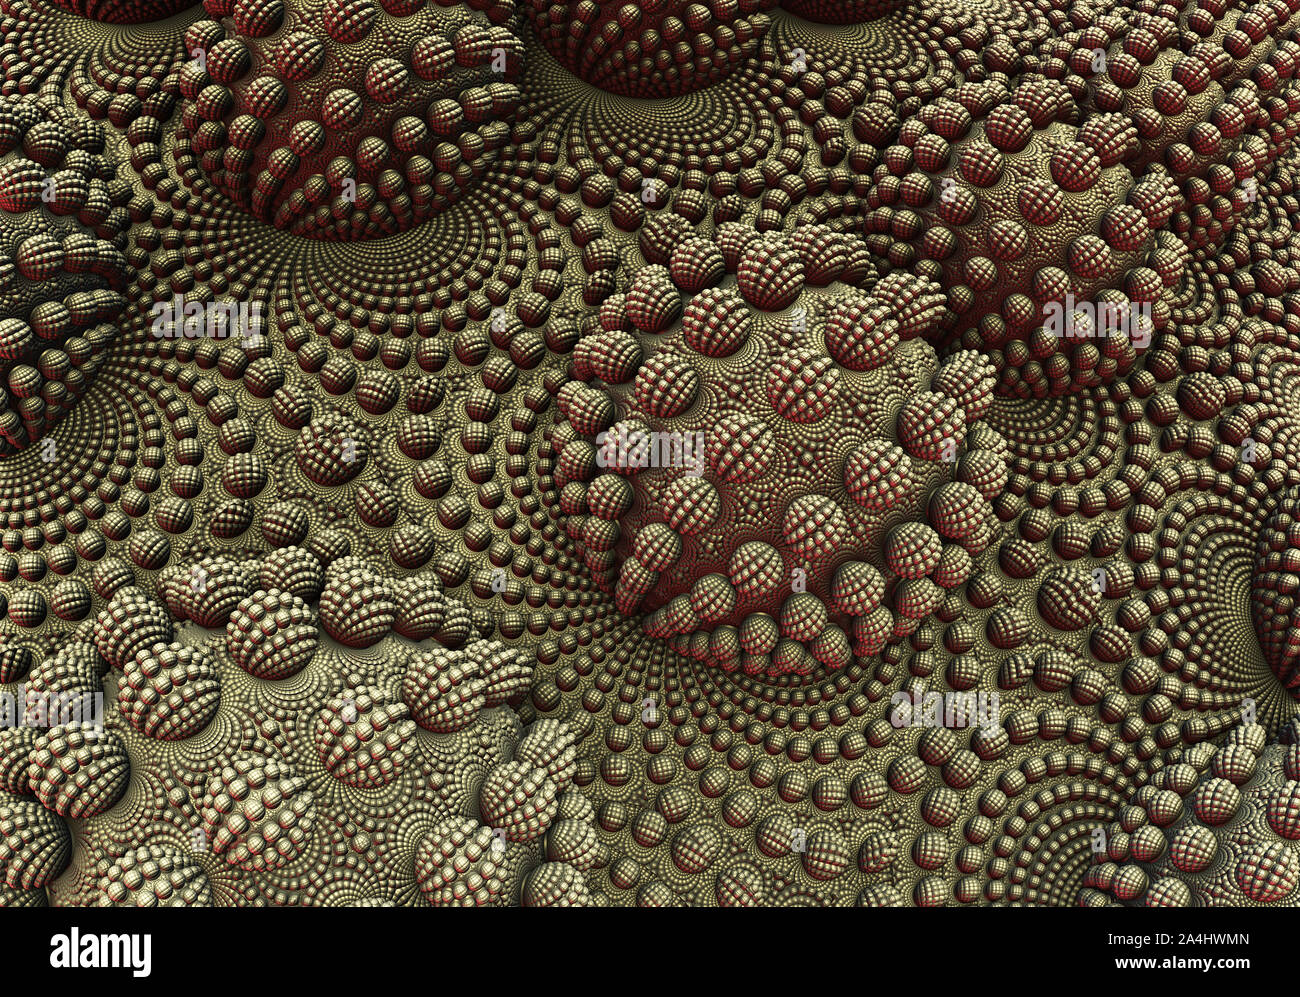 16,081 Shell Fractal Images, Stock Photos, 3D objects, & Vectors